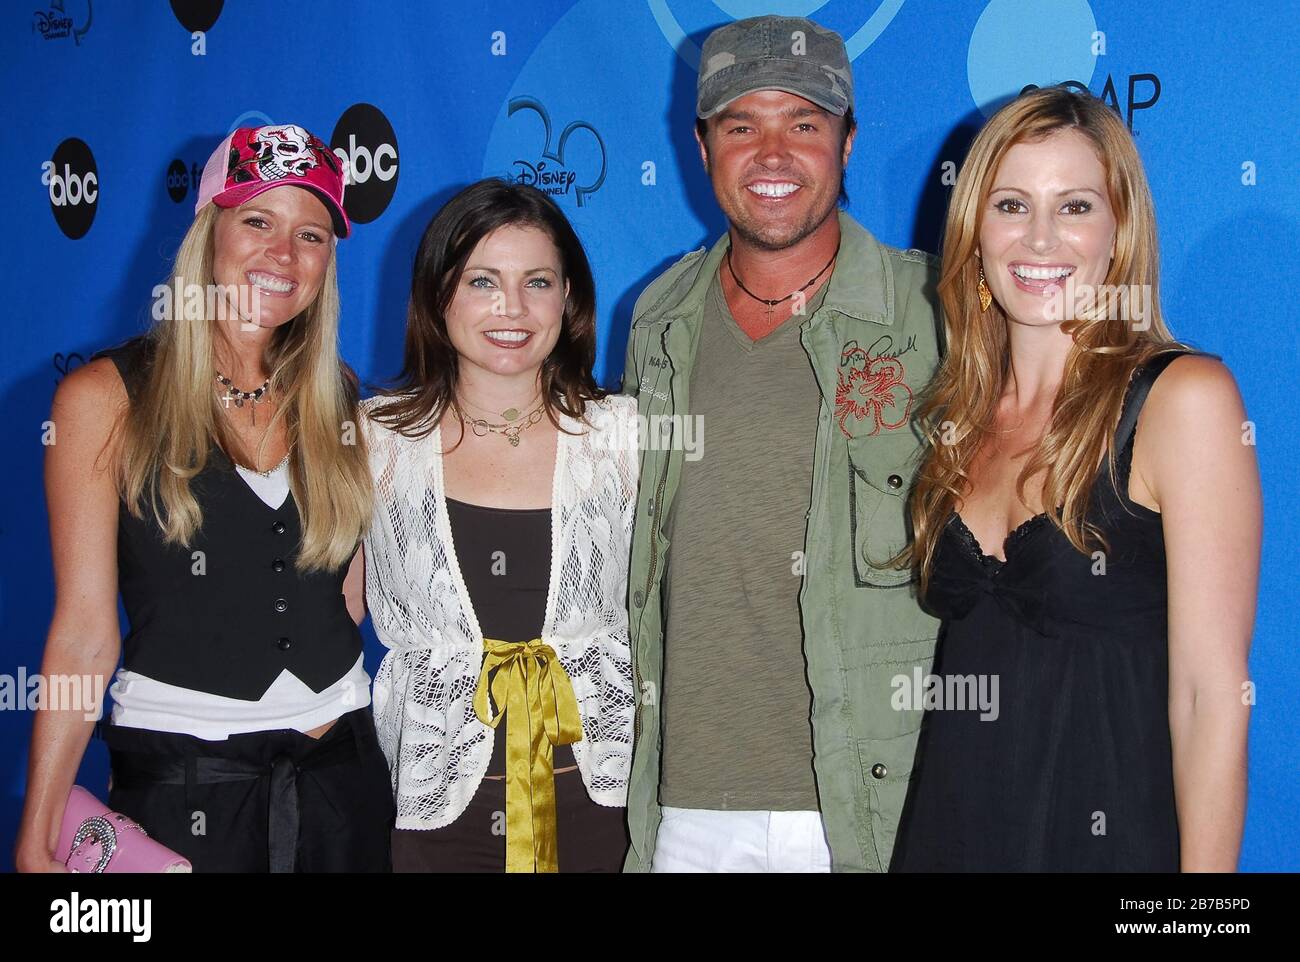 'Extreme Makeover: Home Edition' Cast - Paige Harris, Tanya McQueen, Michael Moloney and Tracy Hutson at the Disney ABC Television Group All Star Party held at the Kidspace Children's Museum in Pasadena, CA. The event took place on Wednesday, July 19, 2006.  Photo by: SBM / PictureLux Stock Photo